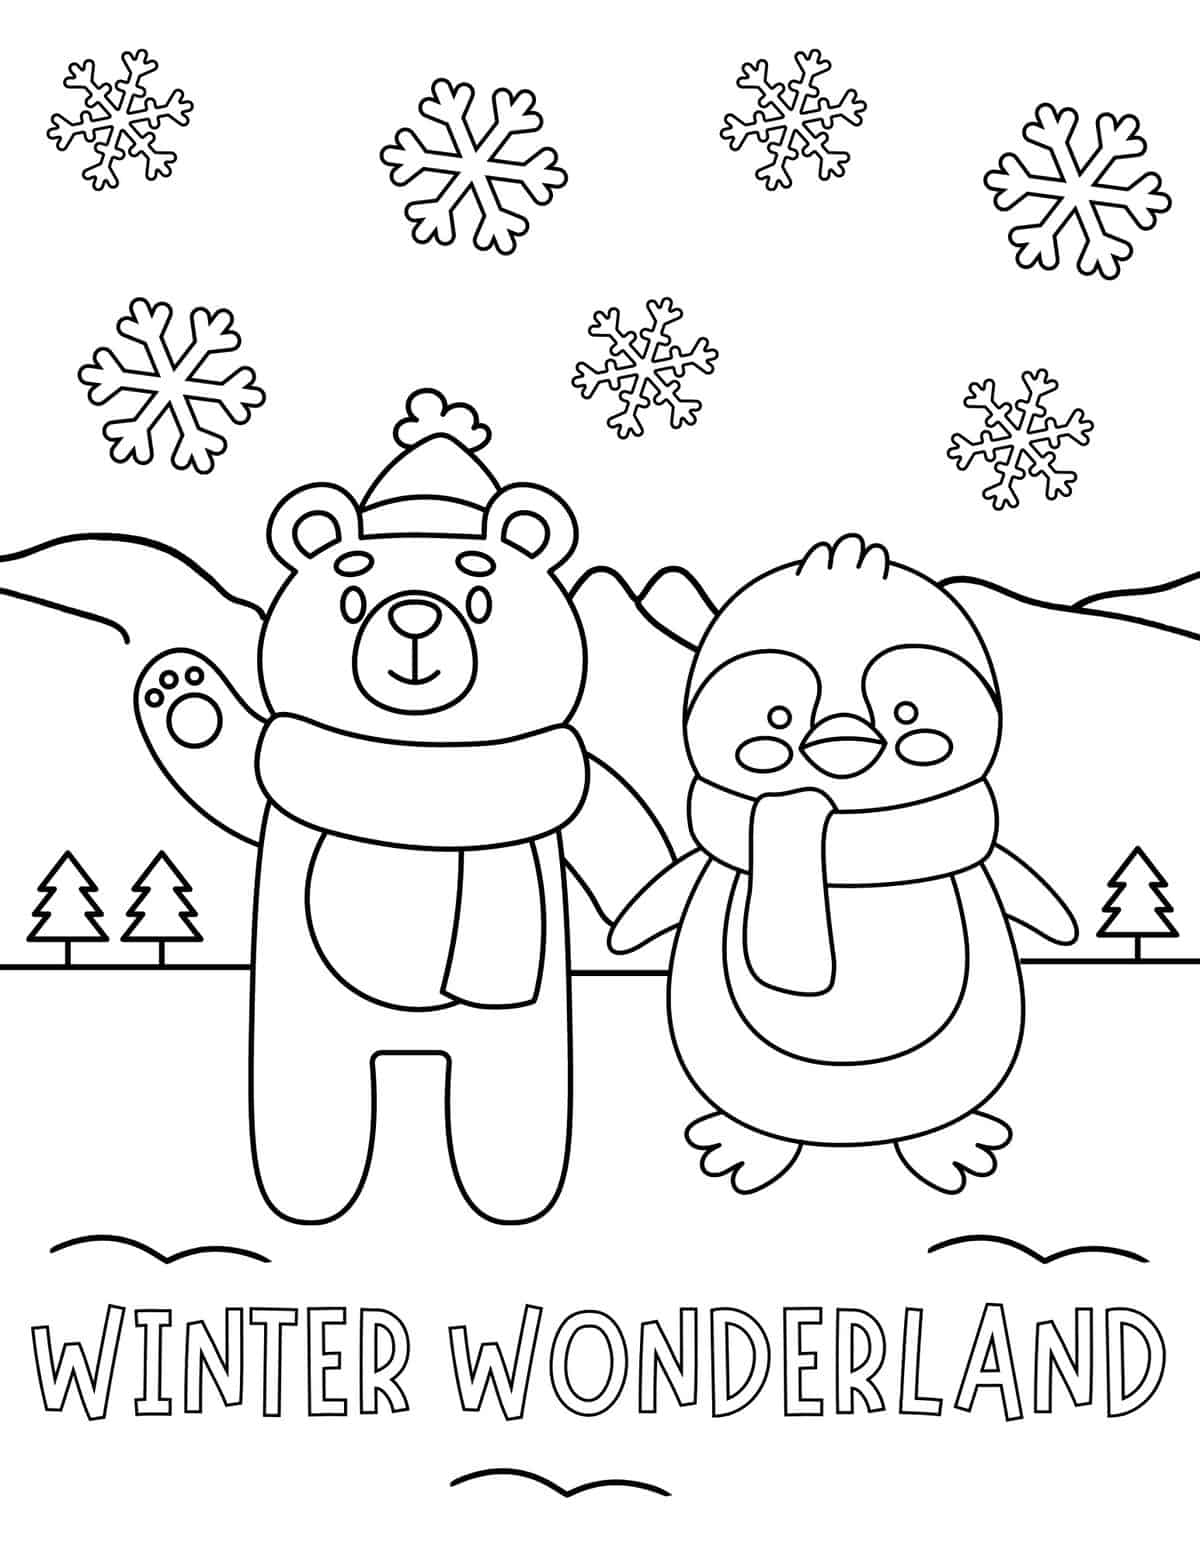 winter wonderland with a reindeer and penguin holding hands